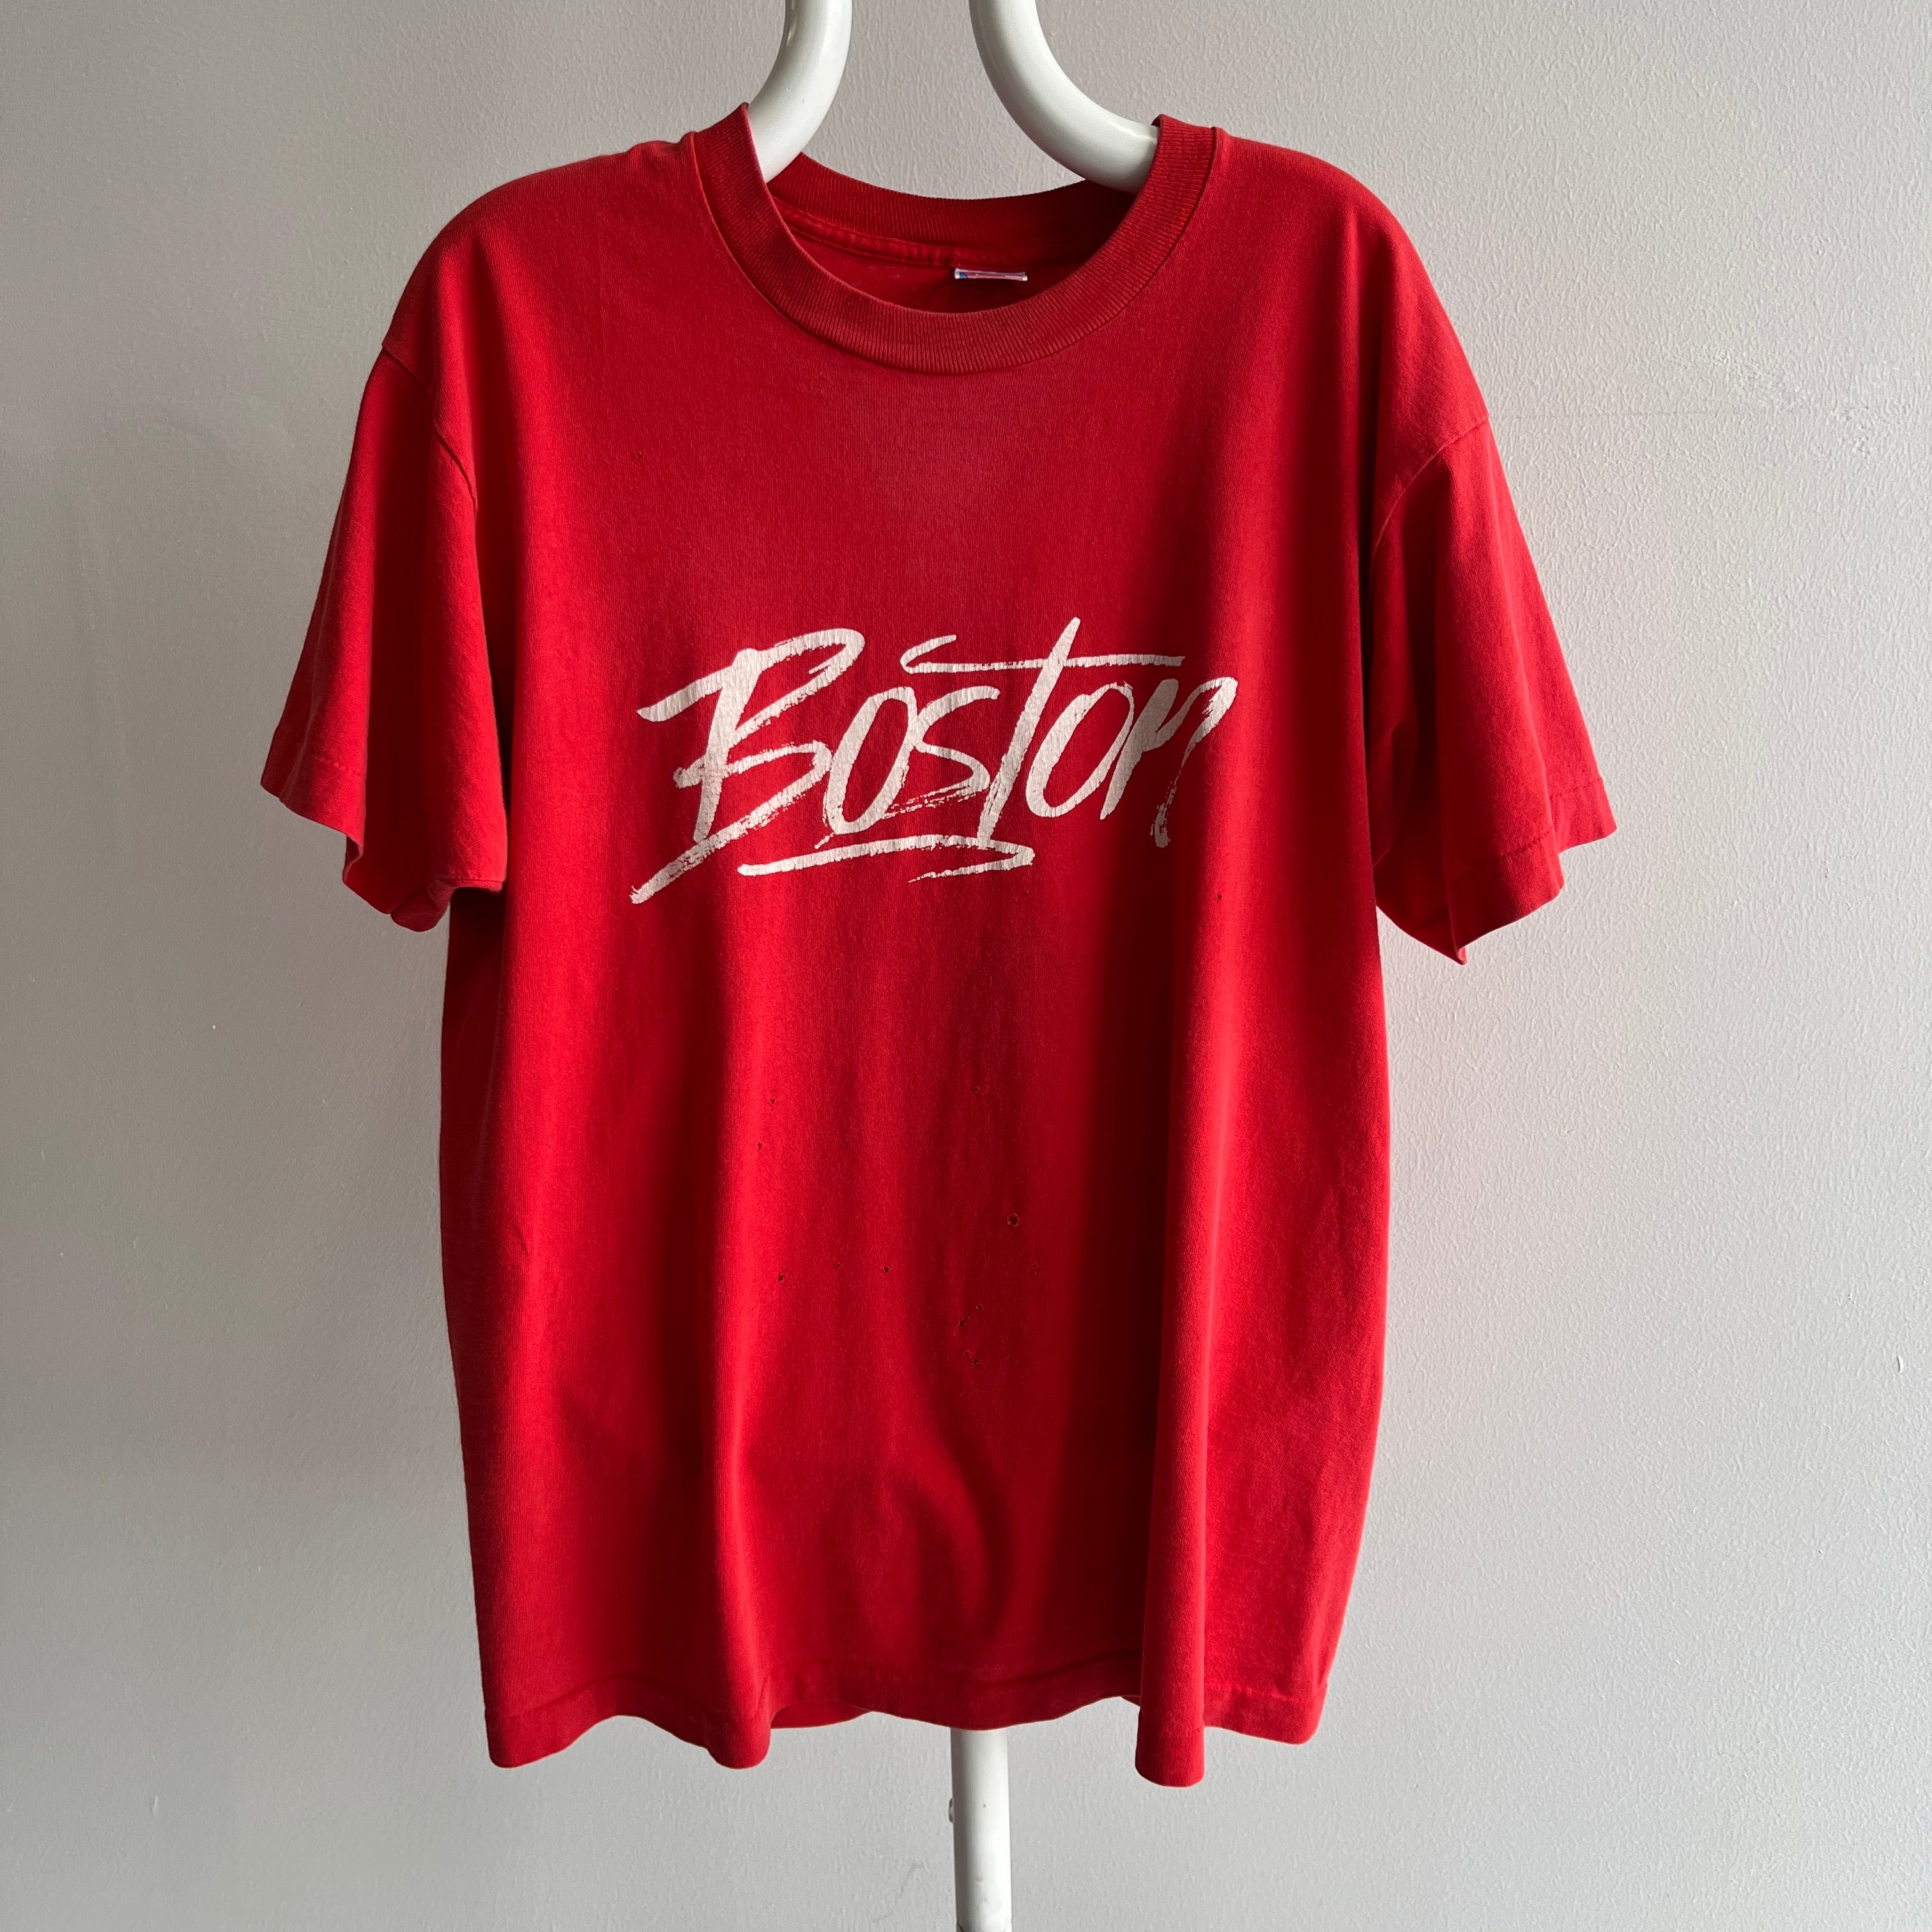 1980s Boston Faded and Beat Up Classic Tourist T-Shirt